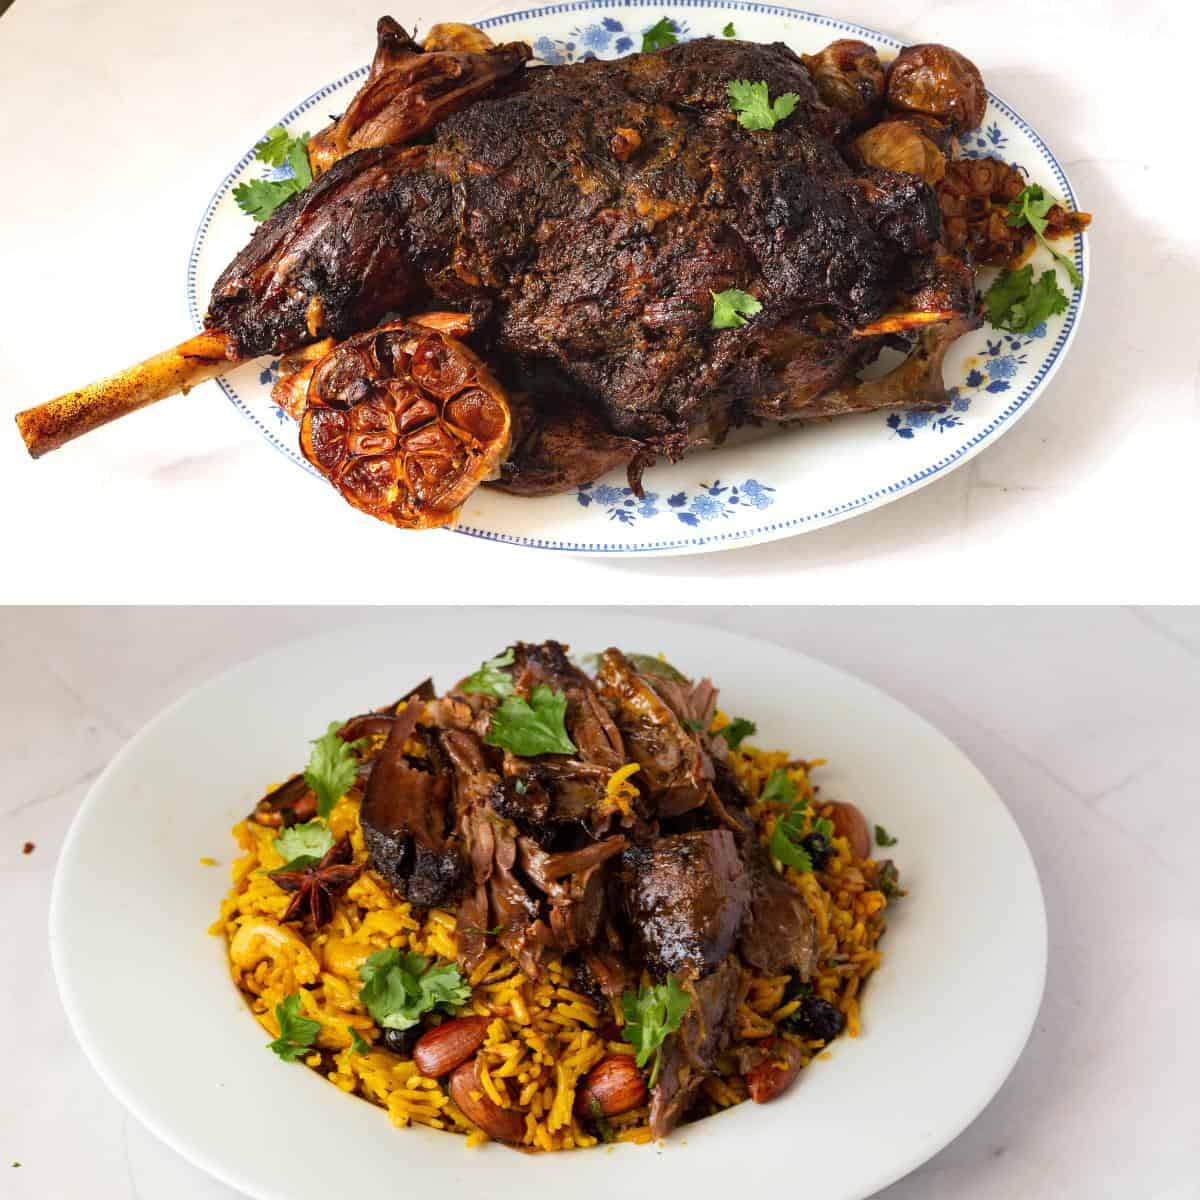 A collage with a plate of rice and a leg of lamb.